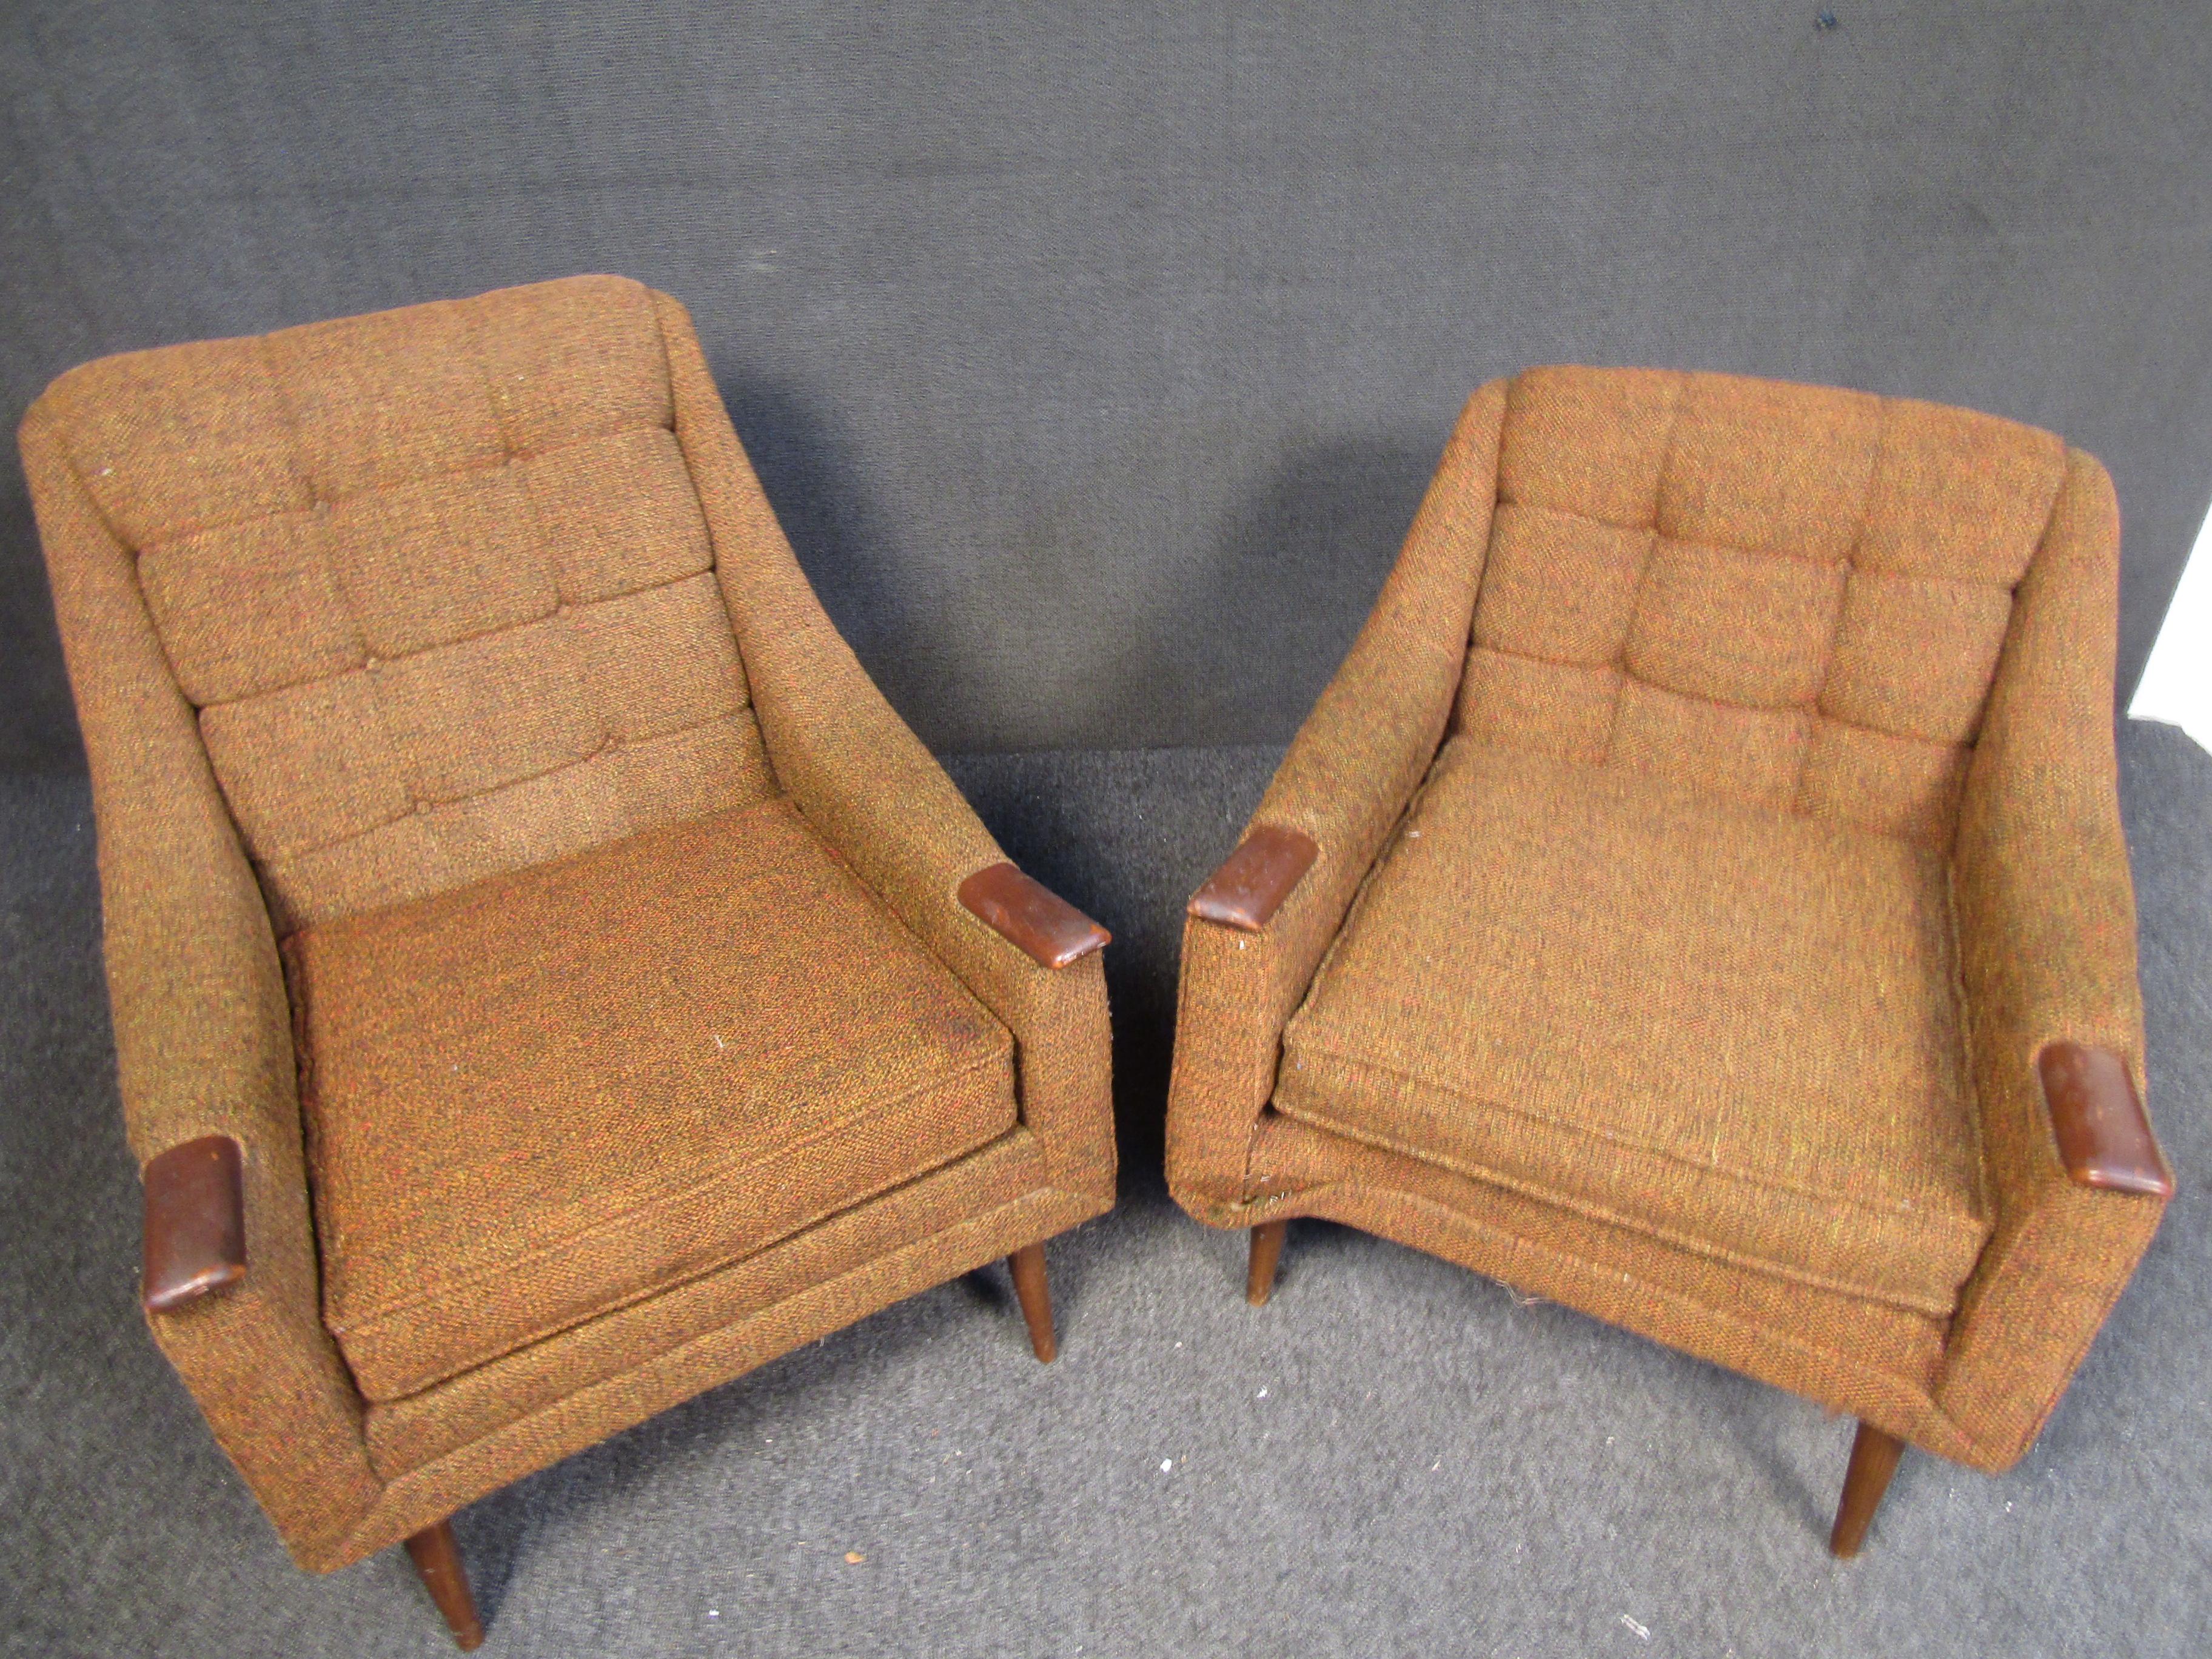 Set of upholstered and walnut chairs. The pair features two different versions often called 